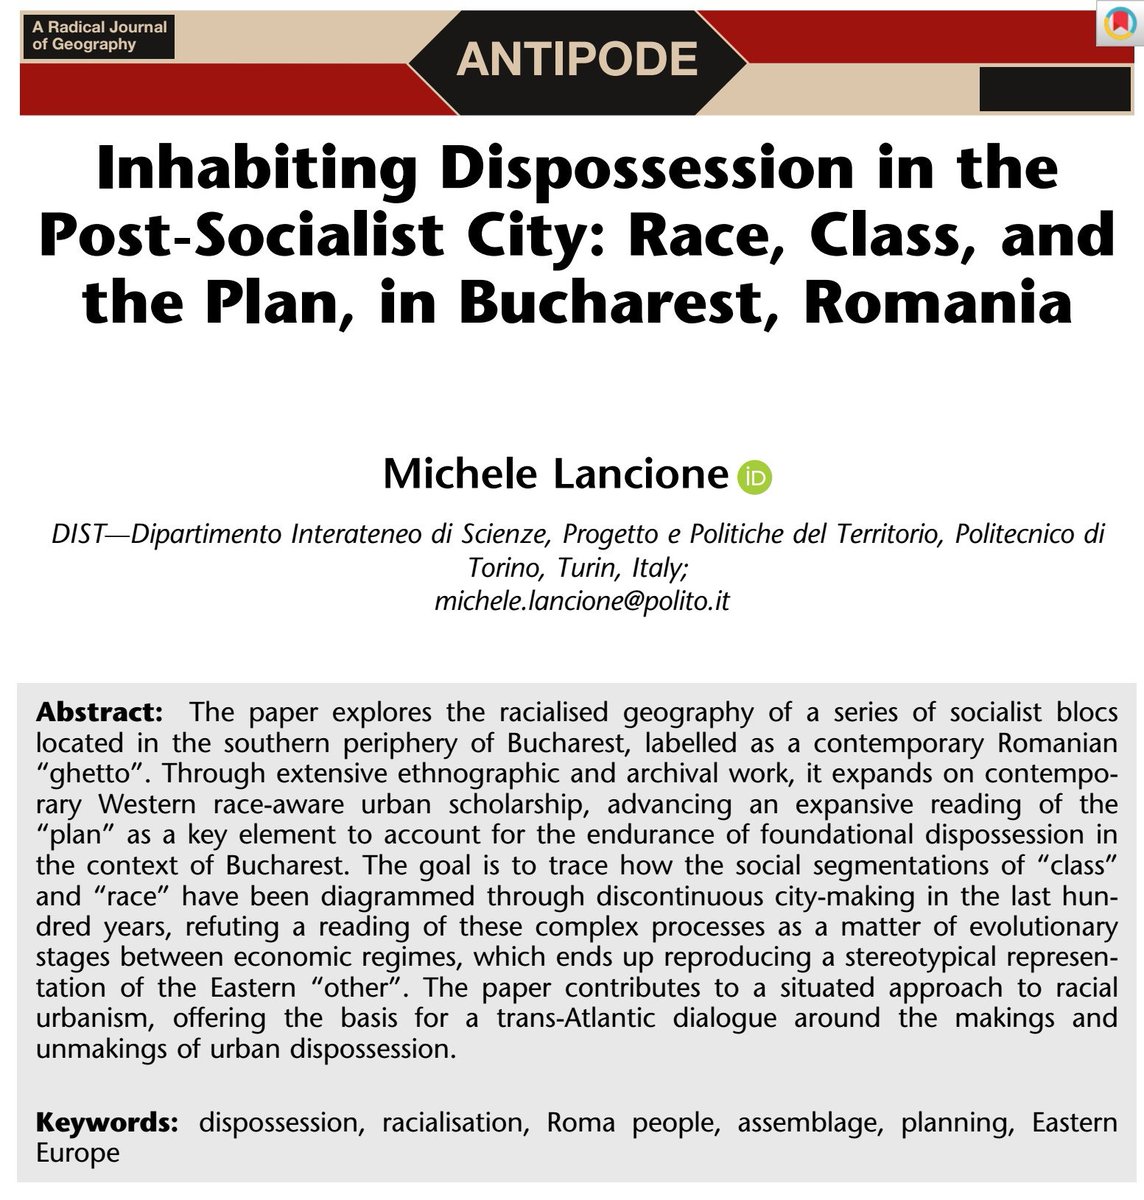 test Twitter Media - My new paper @antipodeonline took years to write

It builds on previous research #race #class #housing  #resistance in #Bucharest & on Romanian scholarship to offer a trans-Atlantic dialogue around the (un)makings of #urban #dispossession

Open access https://t.co/KM2joYNQZc (I) https://t.co/hfcY5Nb3ly